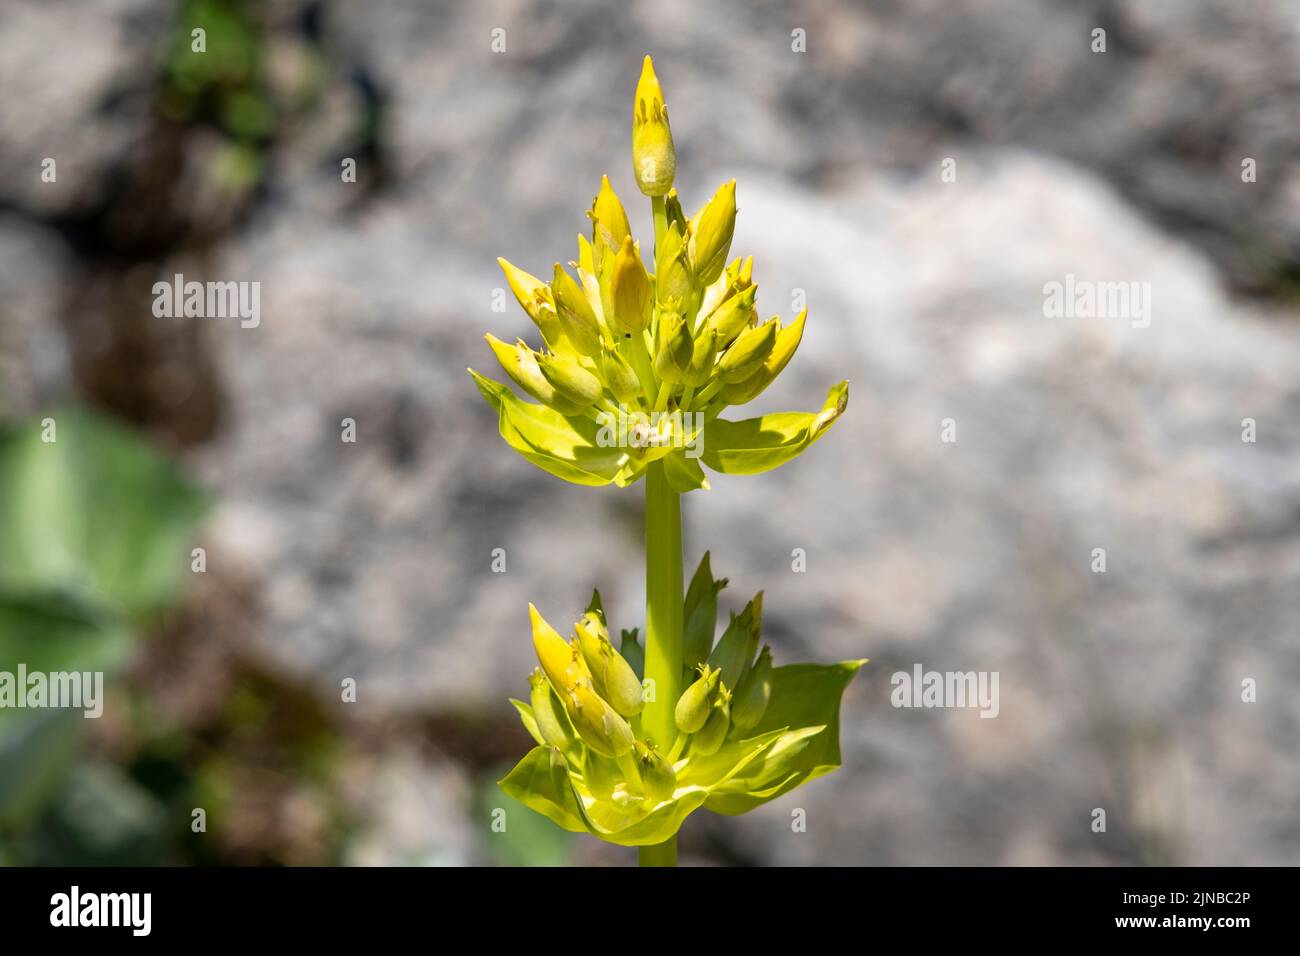 plants and flowers at the Luenersee in Vorarlberg, Austria Stock Photo